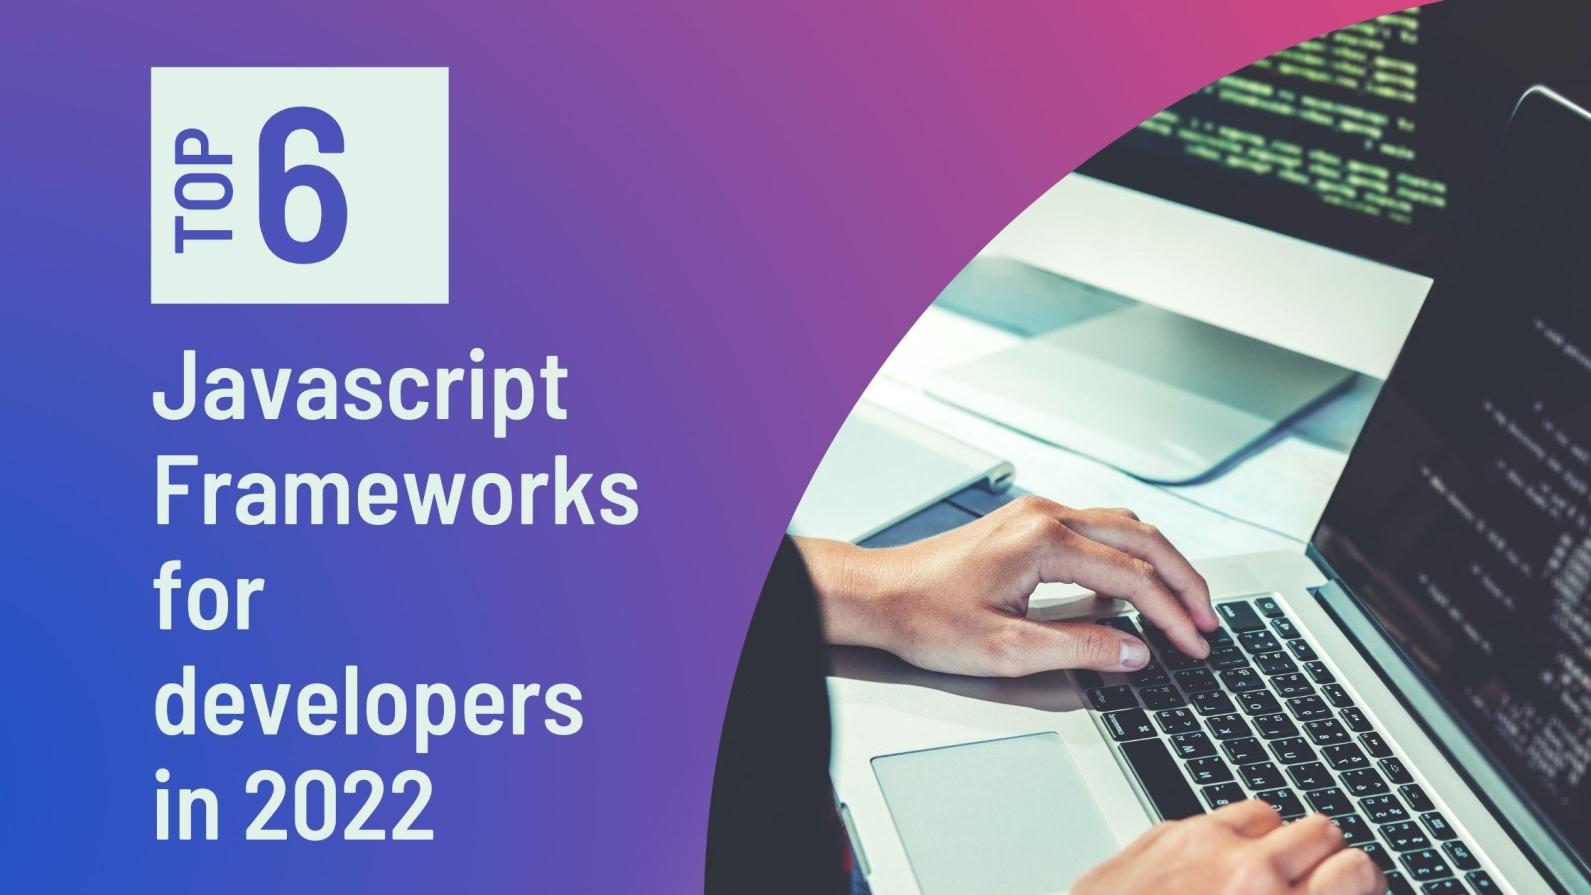 What Are the Best Practices for Developing Applications with JavaScript Frameworks?